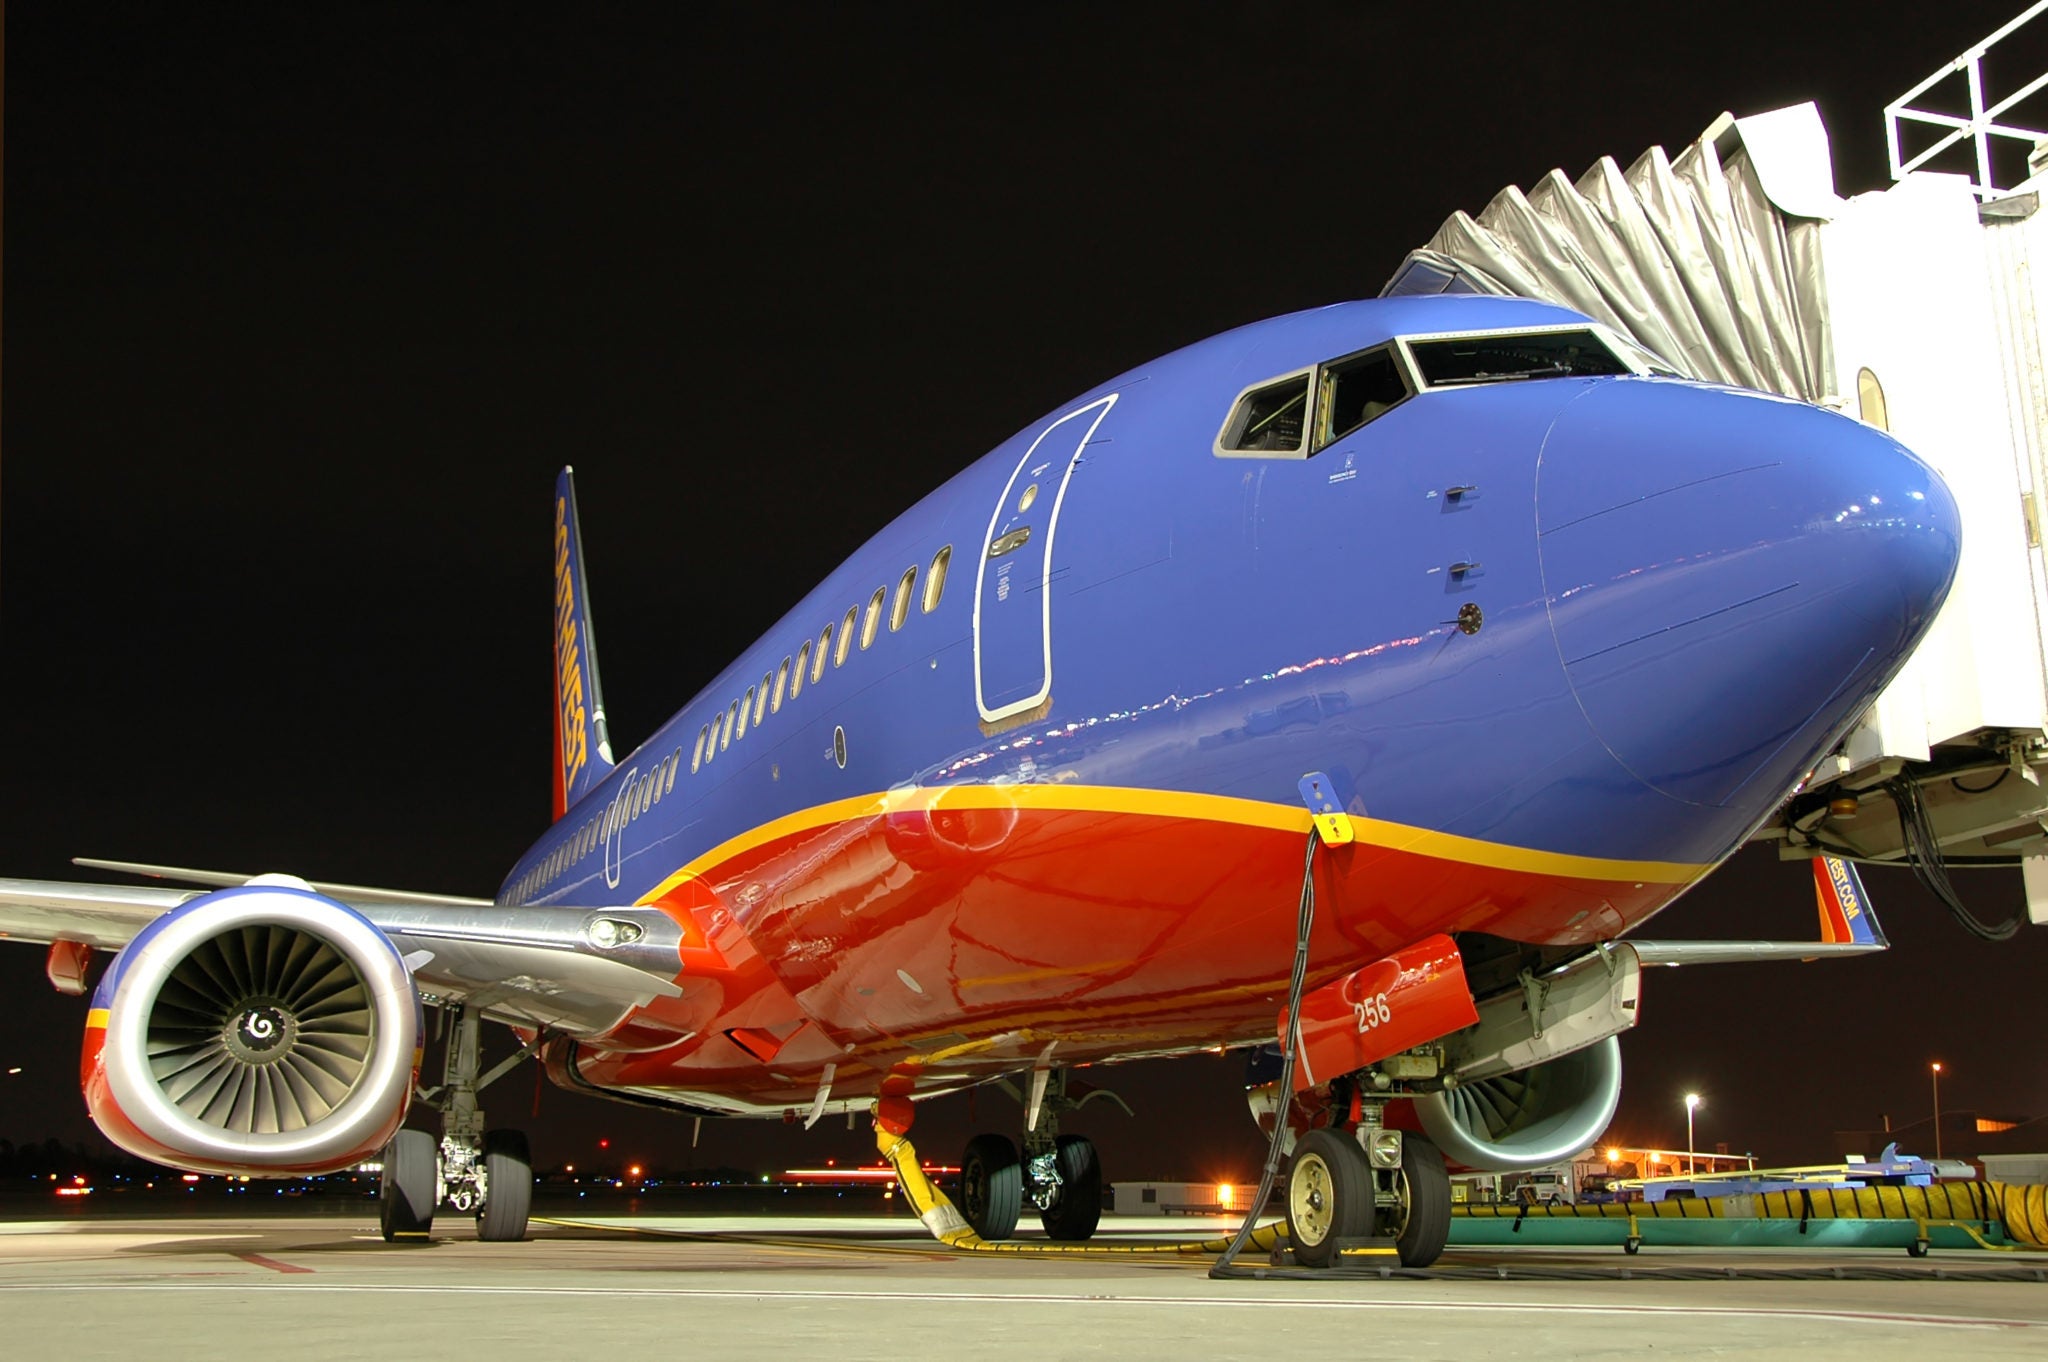 southwest airlines airfares